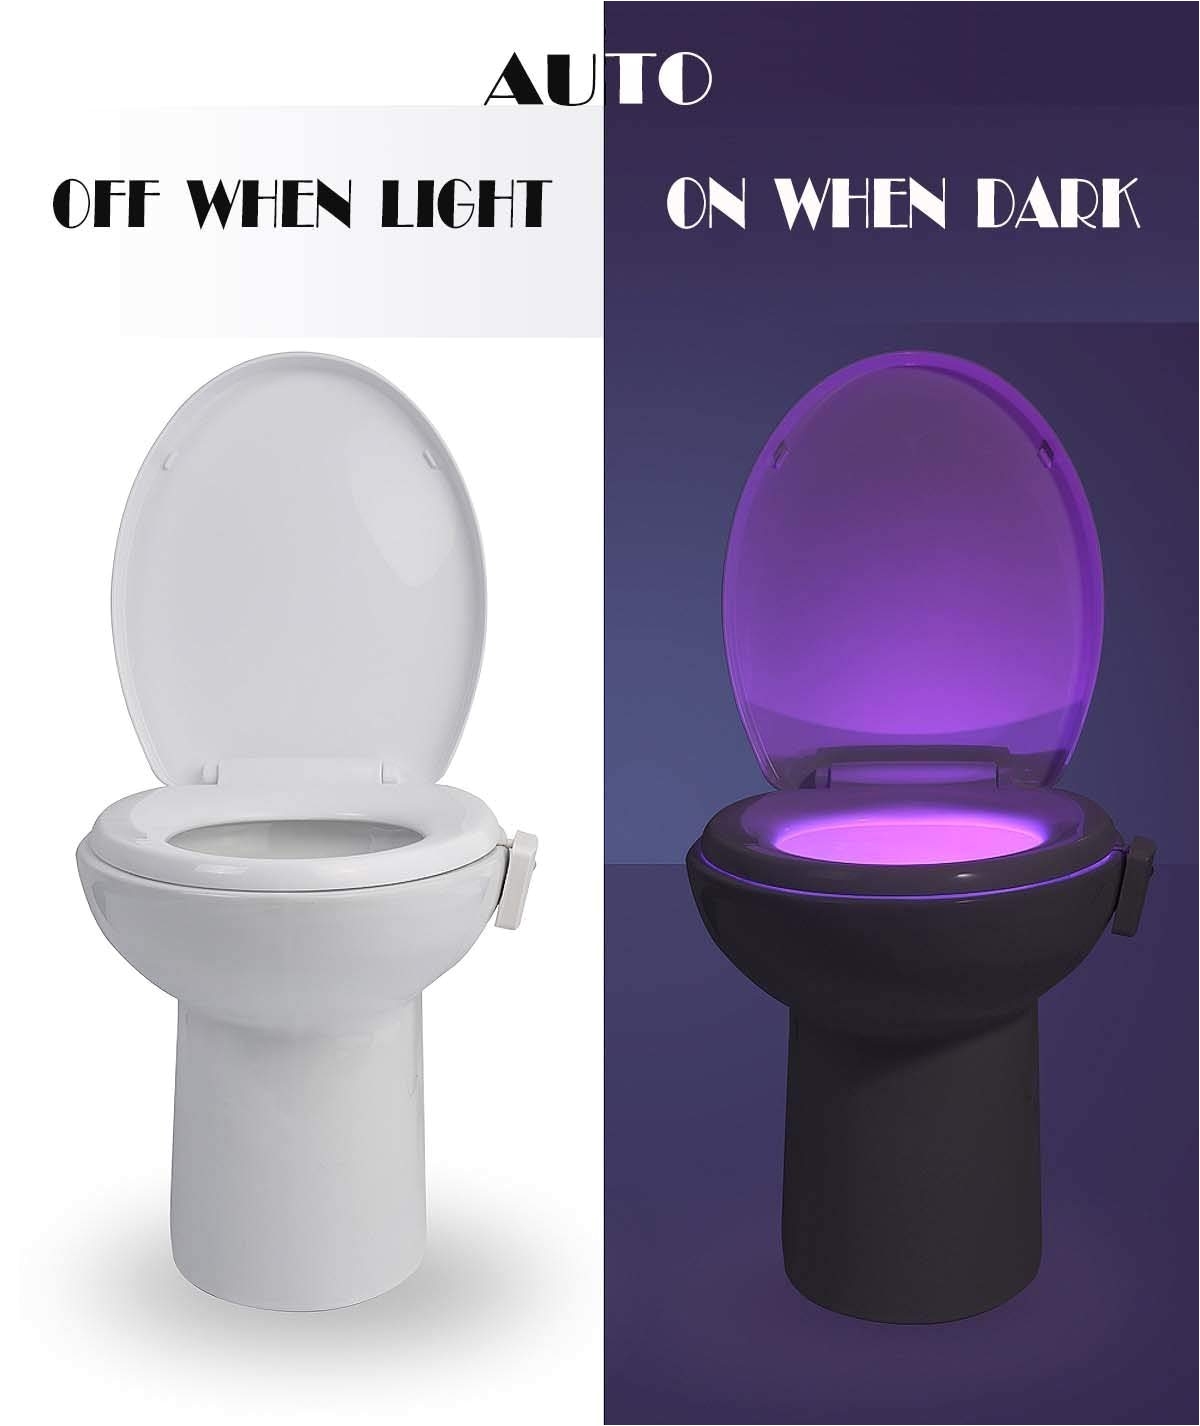 toilet bowl light universal motion activated light led go and glow nightlight 8 color options and color rotate mode for nighttime trips to bathroom by